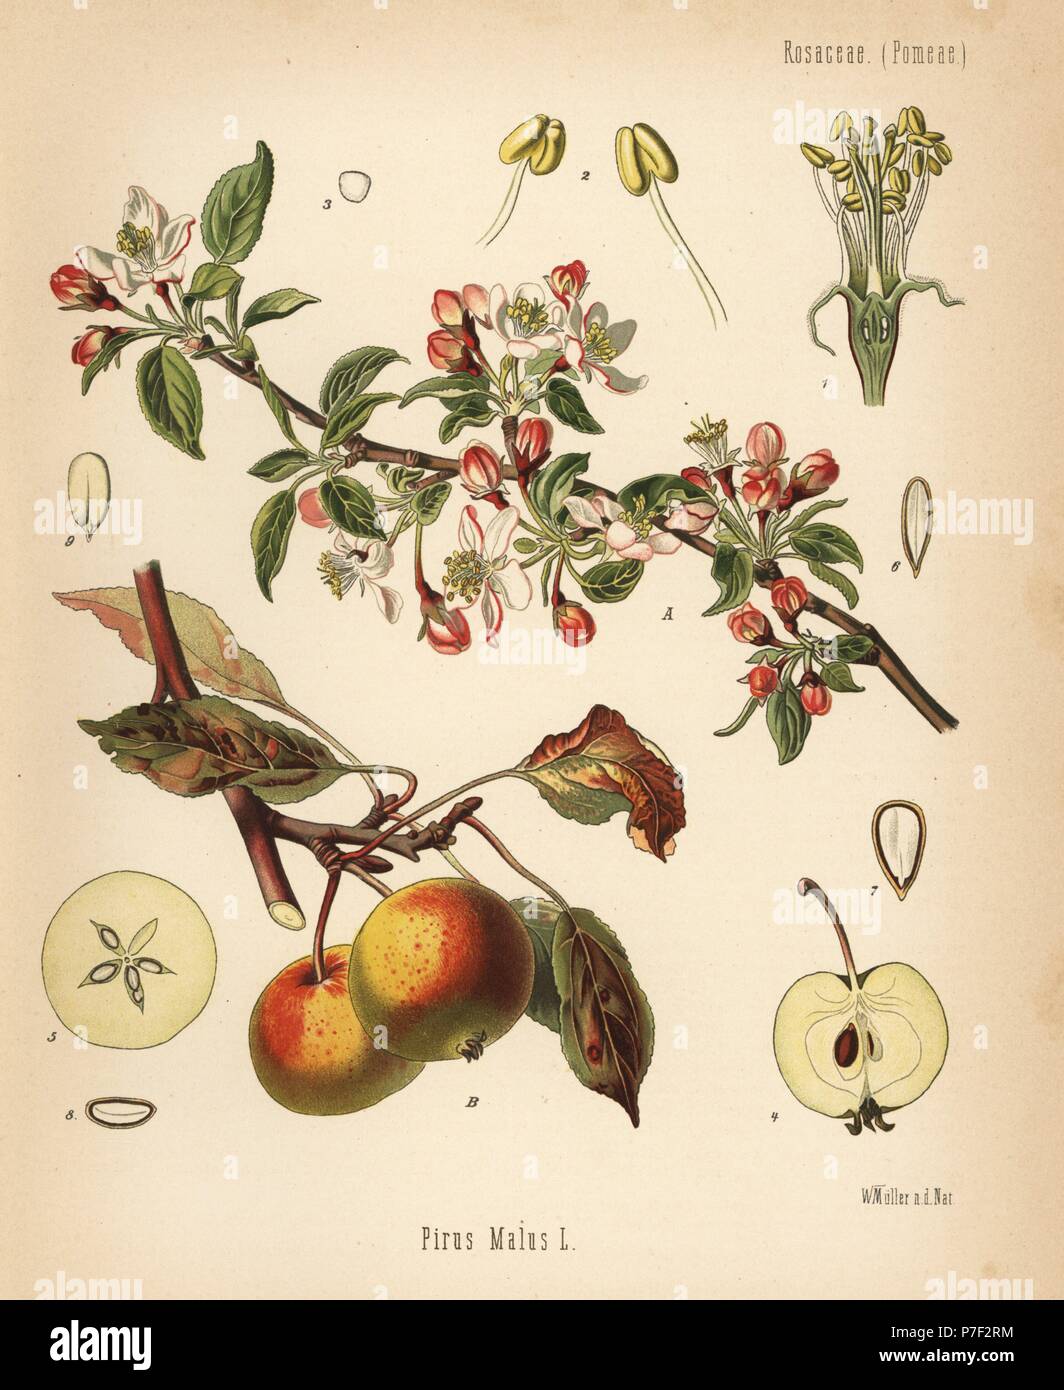 Apple tree, Malus domestica (Pyrus malus). Chromolithograph after a botanical illustration by Walther Muller from Hermann Adolph Koehler's Medicinal Plants, edited by Gustav Pabst, Koehler, Germany, 1887. Stock Photo